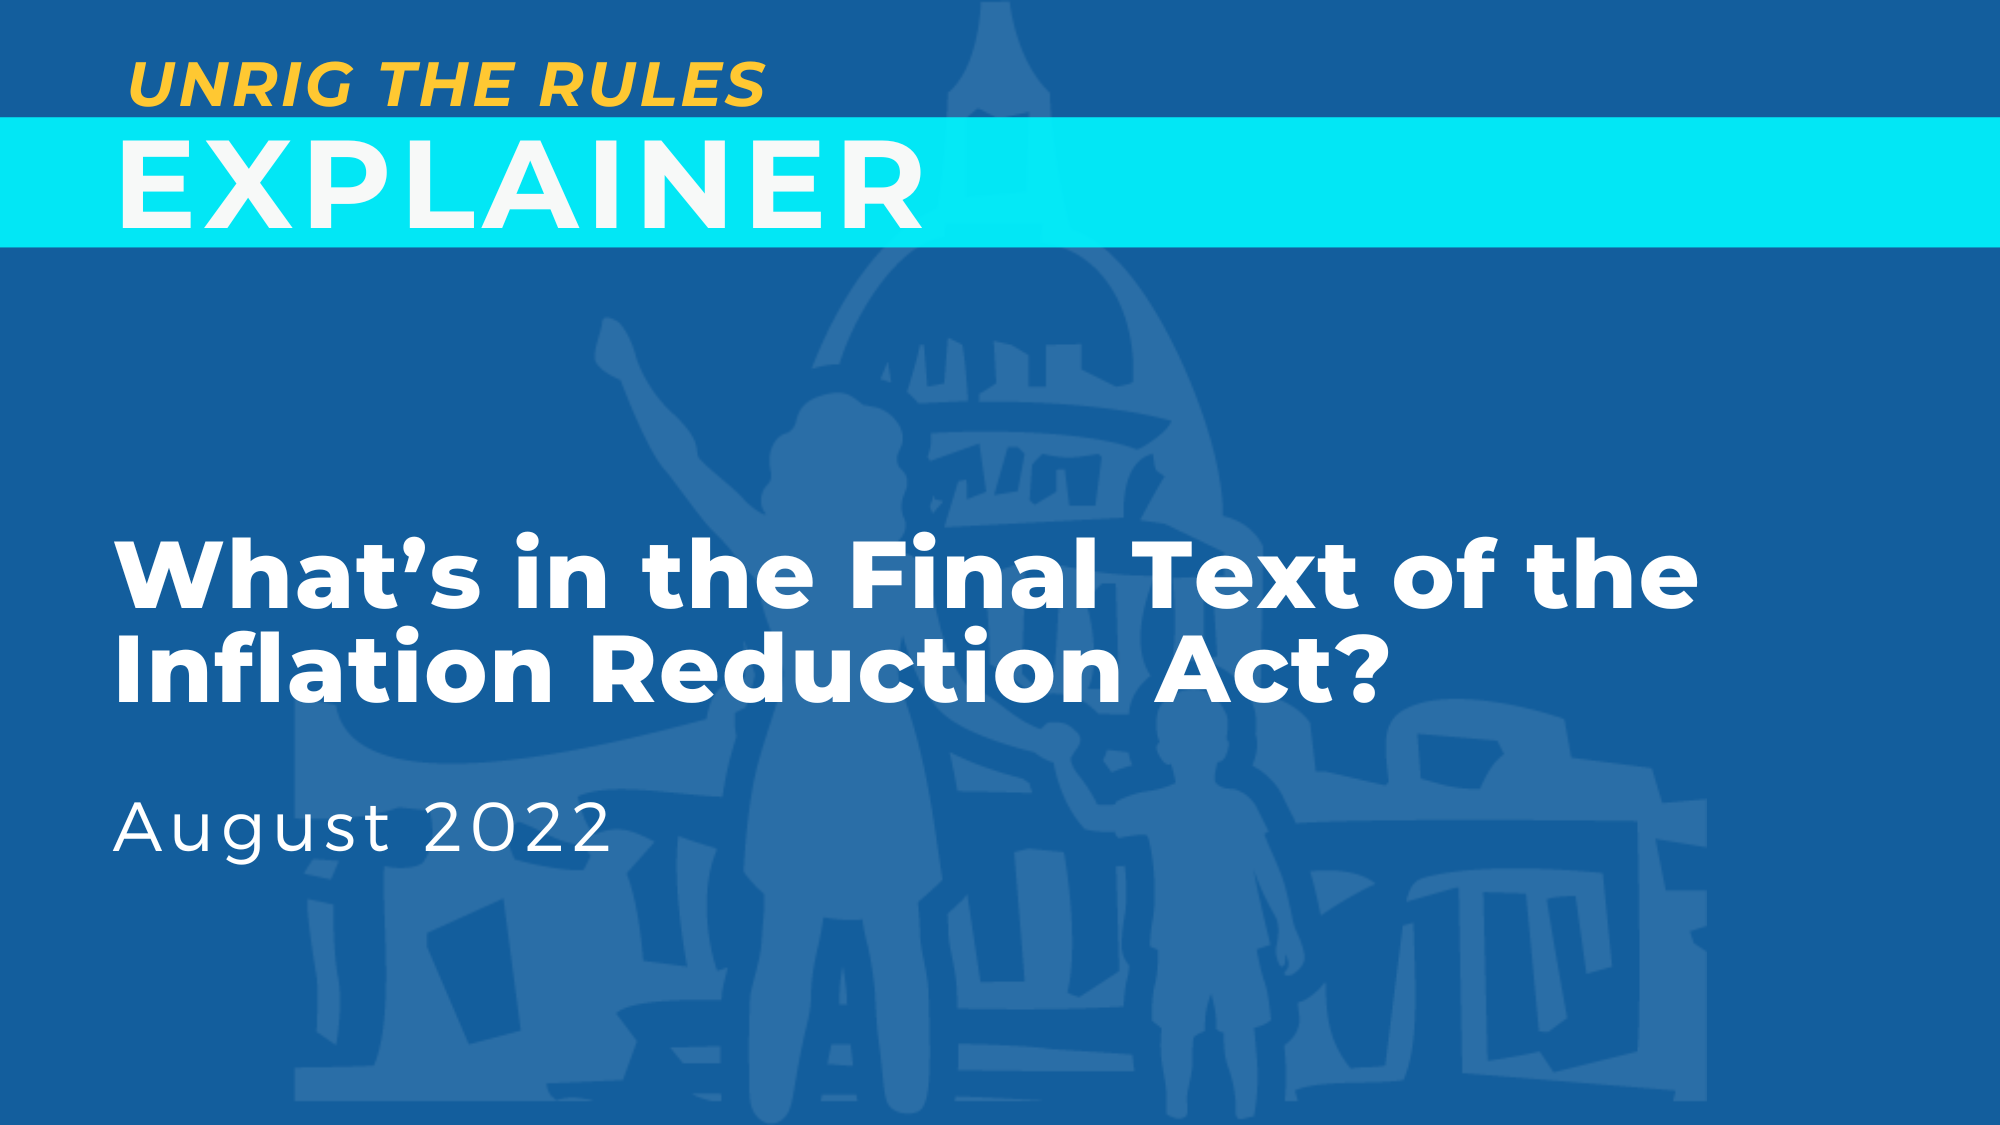 What’s in the Final Text of the Inflation Reduction Act?